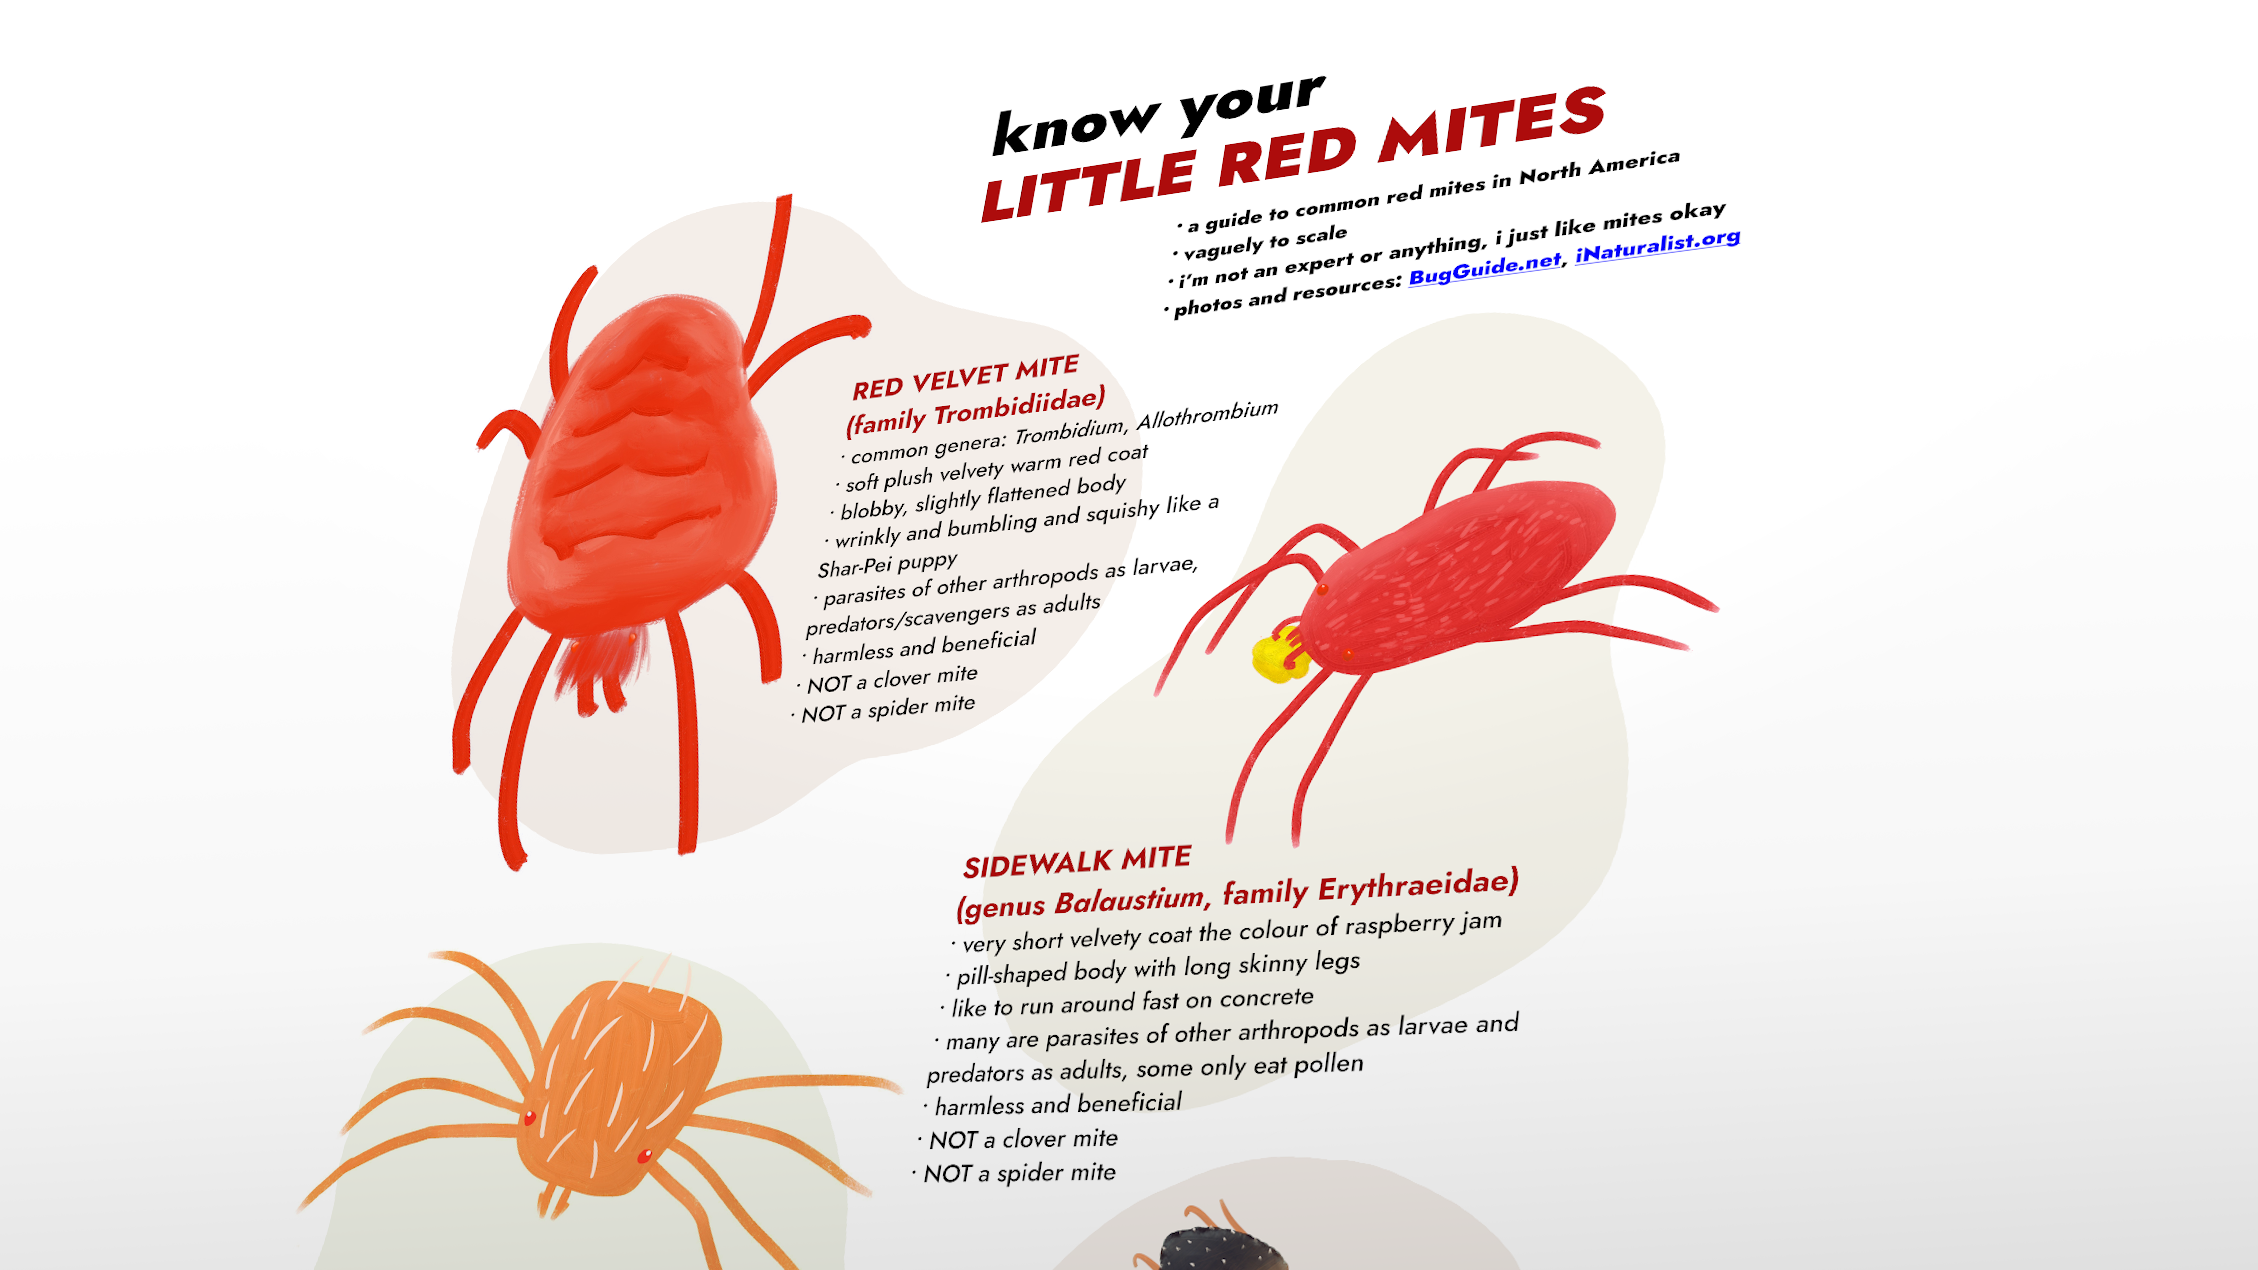 Know Your Little Red Mites: A Guide